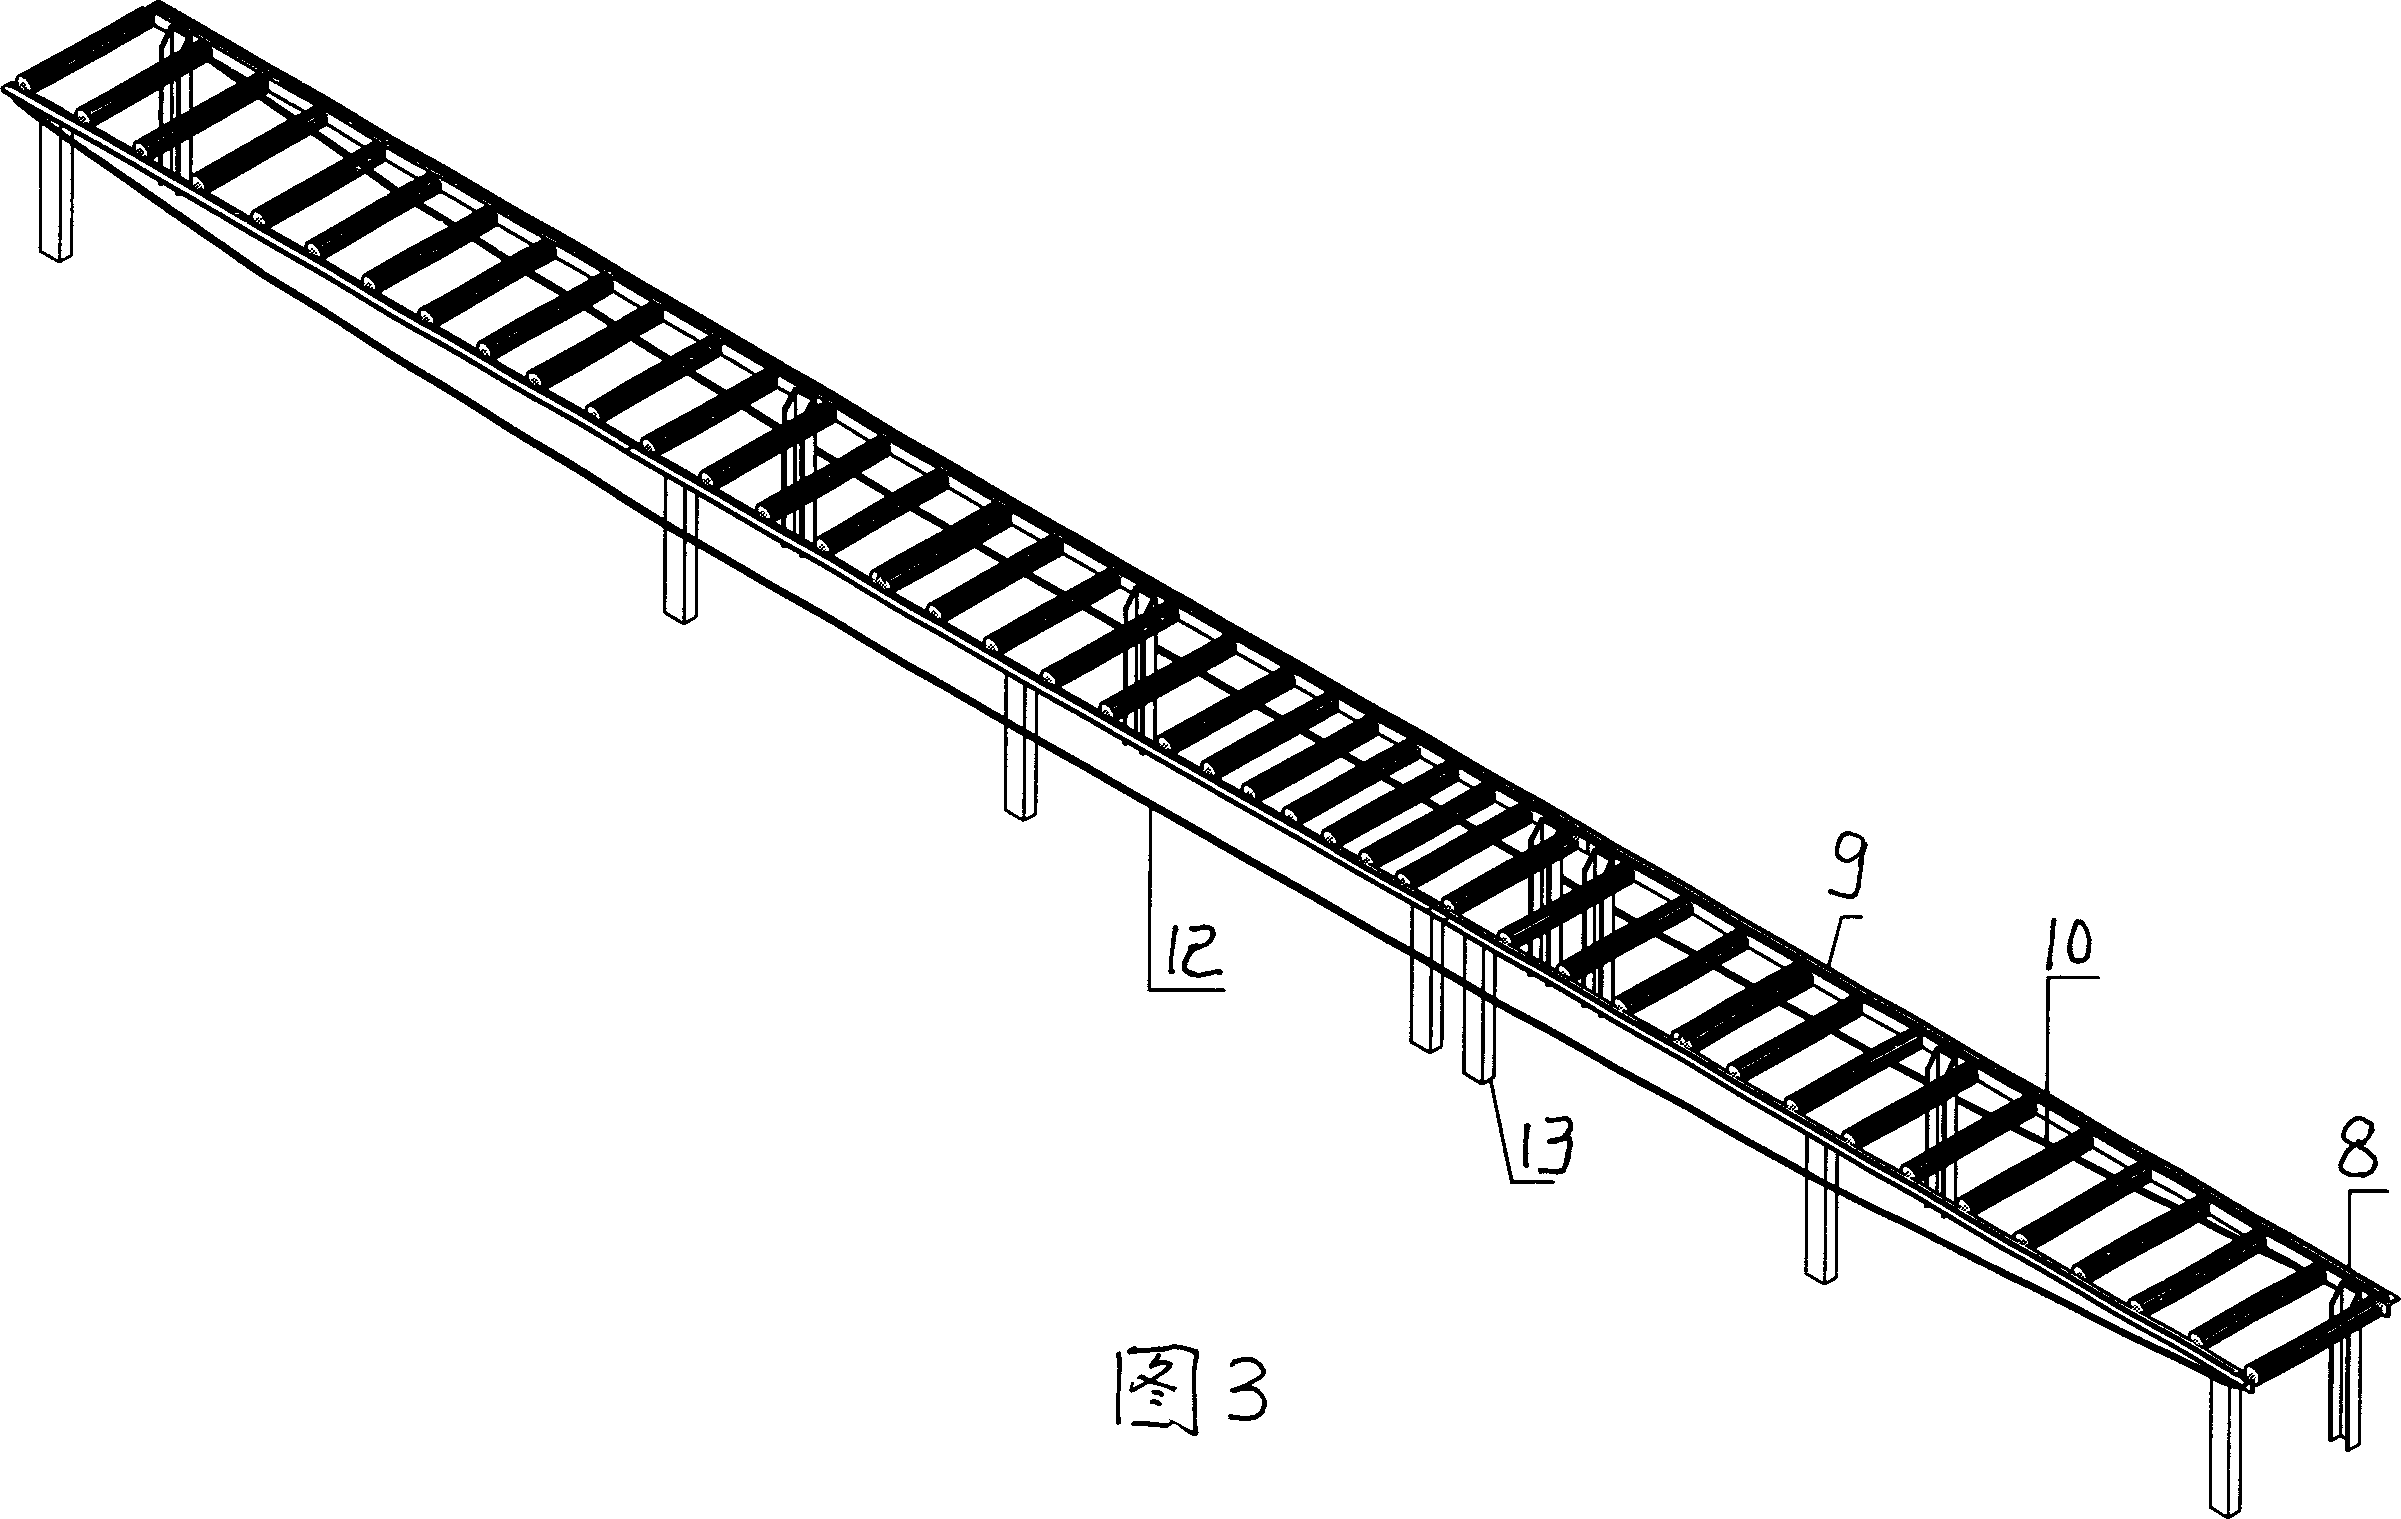 Light weight wall board production technology and equipment complex thereof